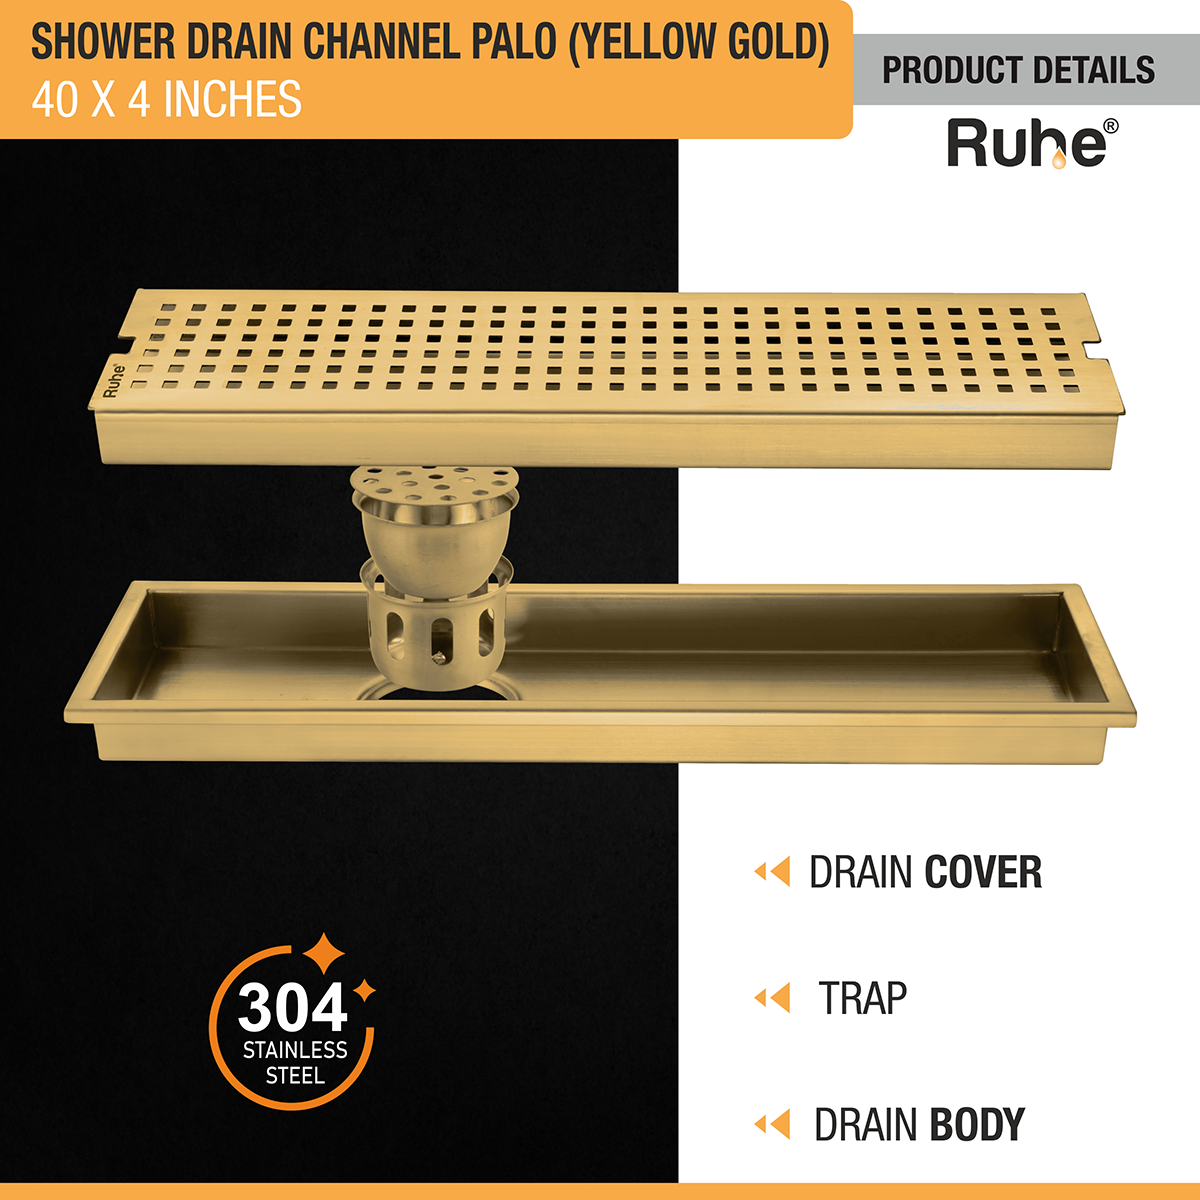 Palo Shower Drain Channel (40 x 4 Inches) YELLOW GOLD product details